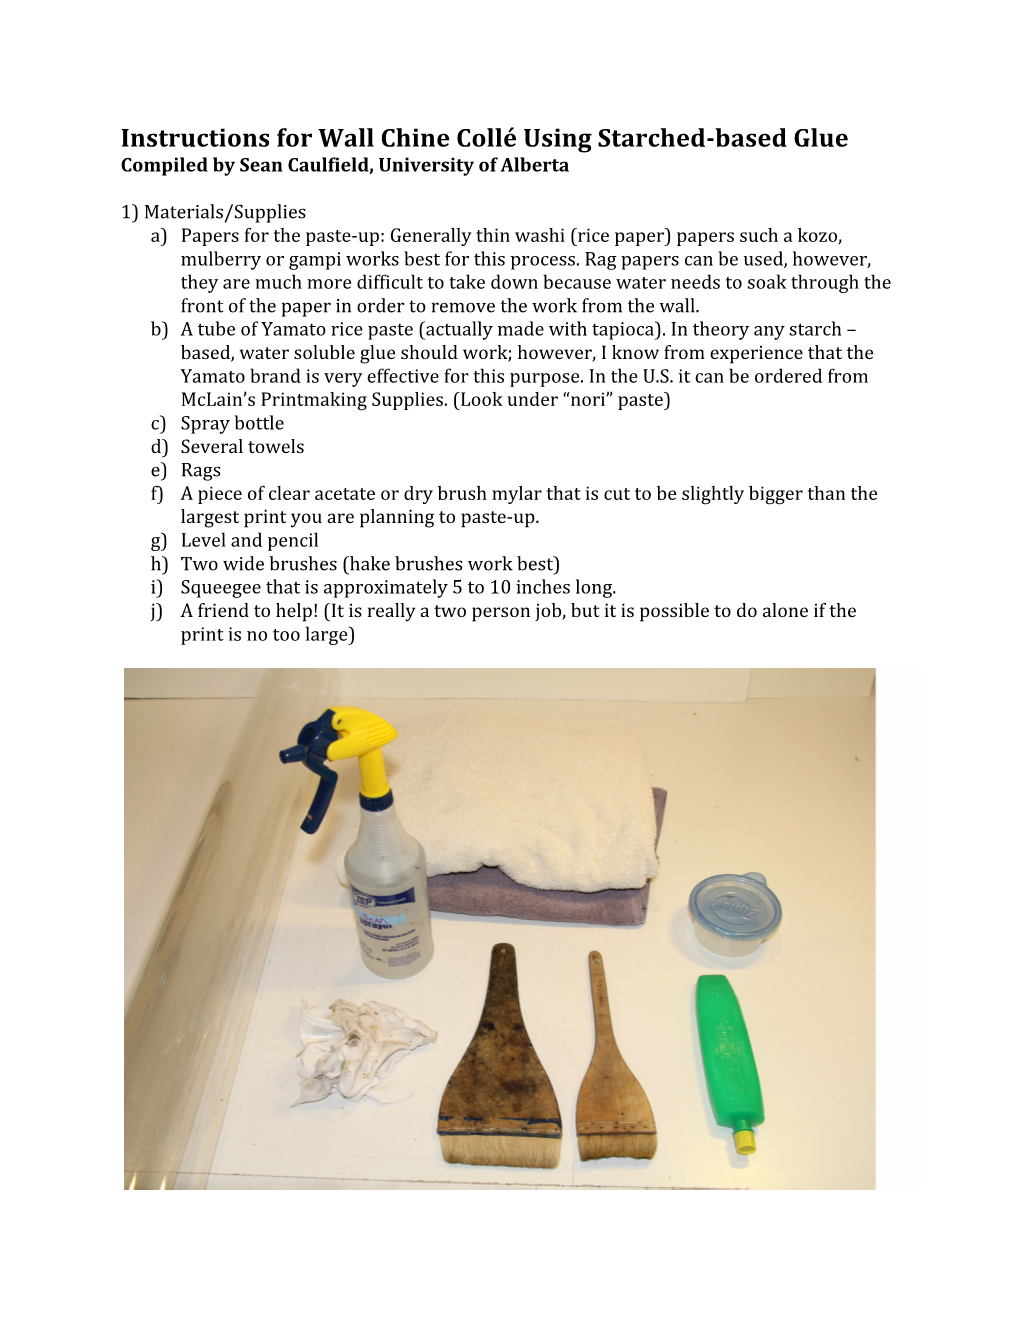 Instructions for Wall Chine Collé Using Starched-‐Based Glue